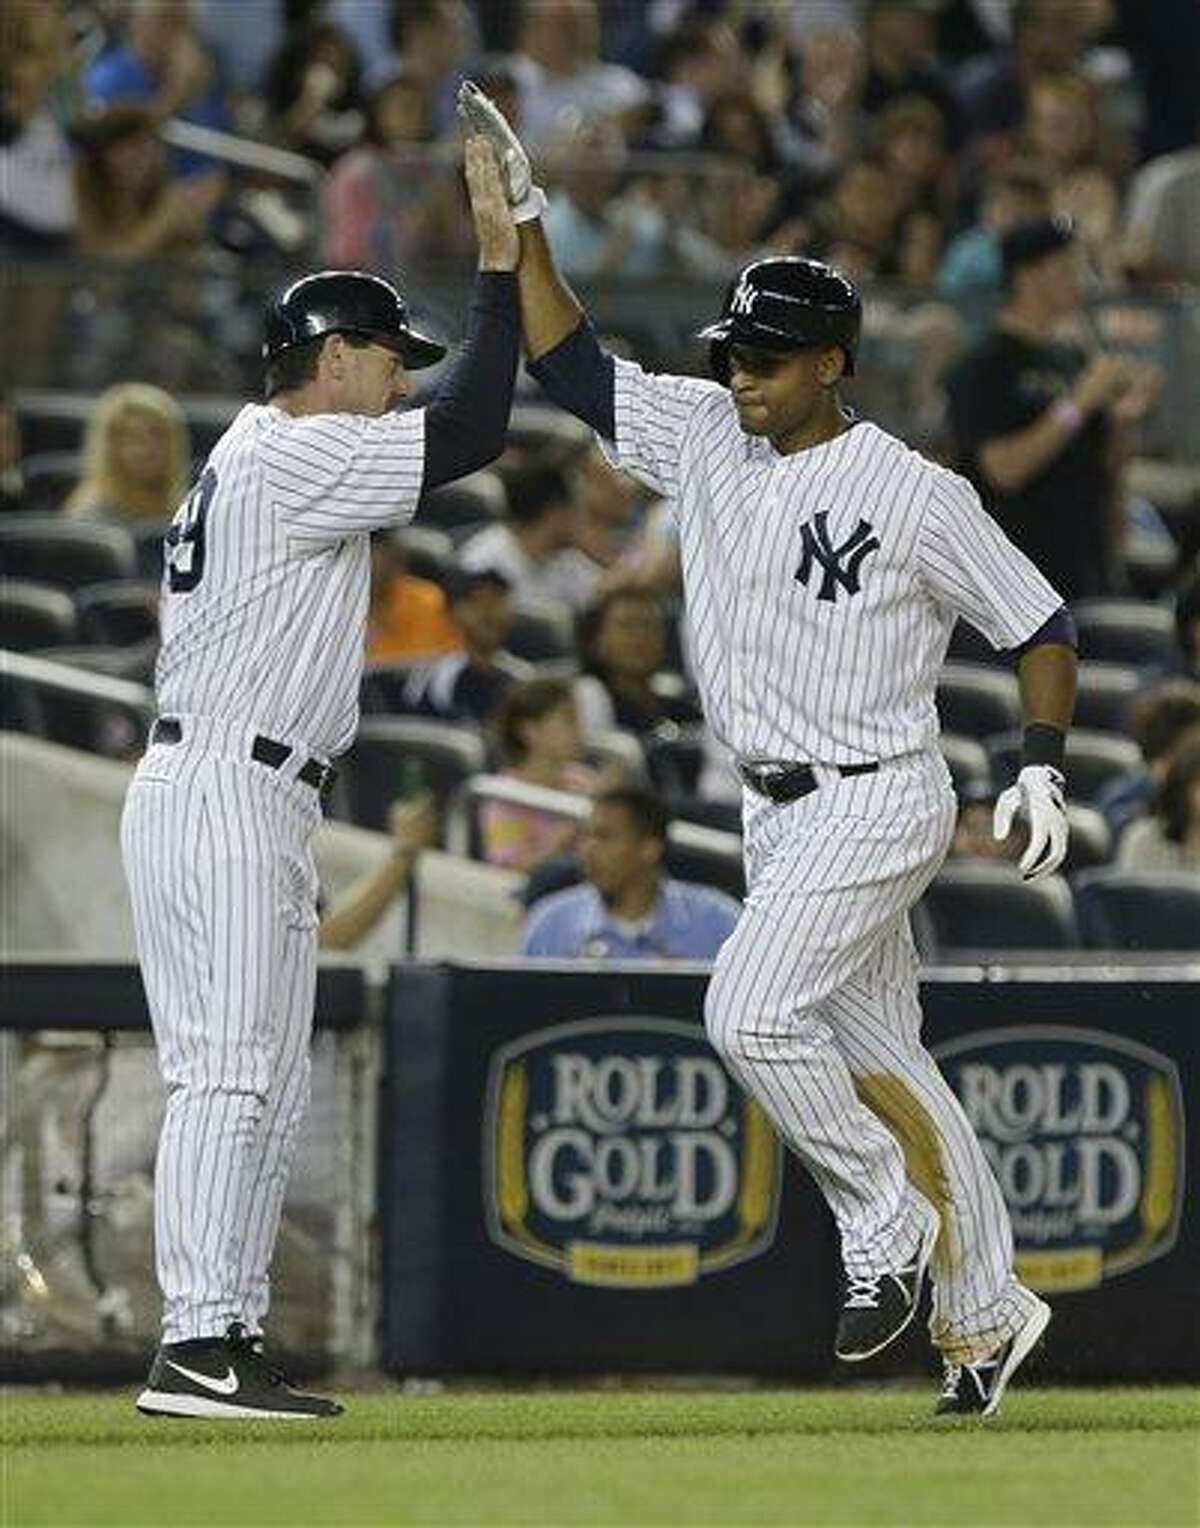 New York Yankees' Zoilo Almonte, right, celebrates with third base coach Rob Thomson as he heads to home plate after hitting a home run during the sixth inning of a baseball game on Friday, June 21, 2013, in New York. (AP Photo/Frank Franklin II)